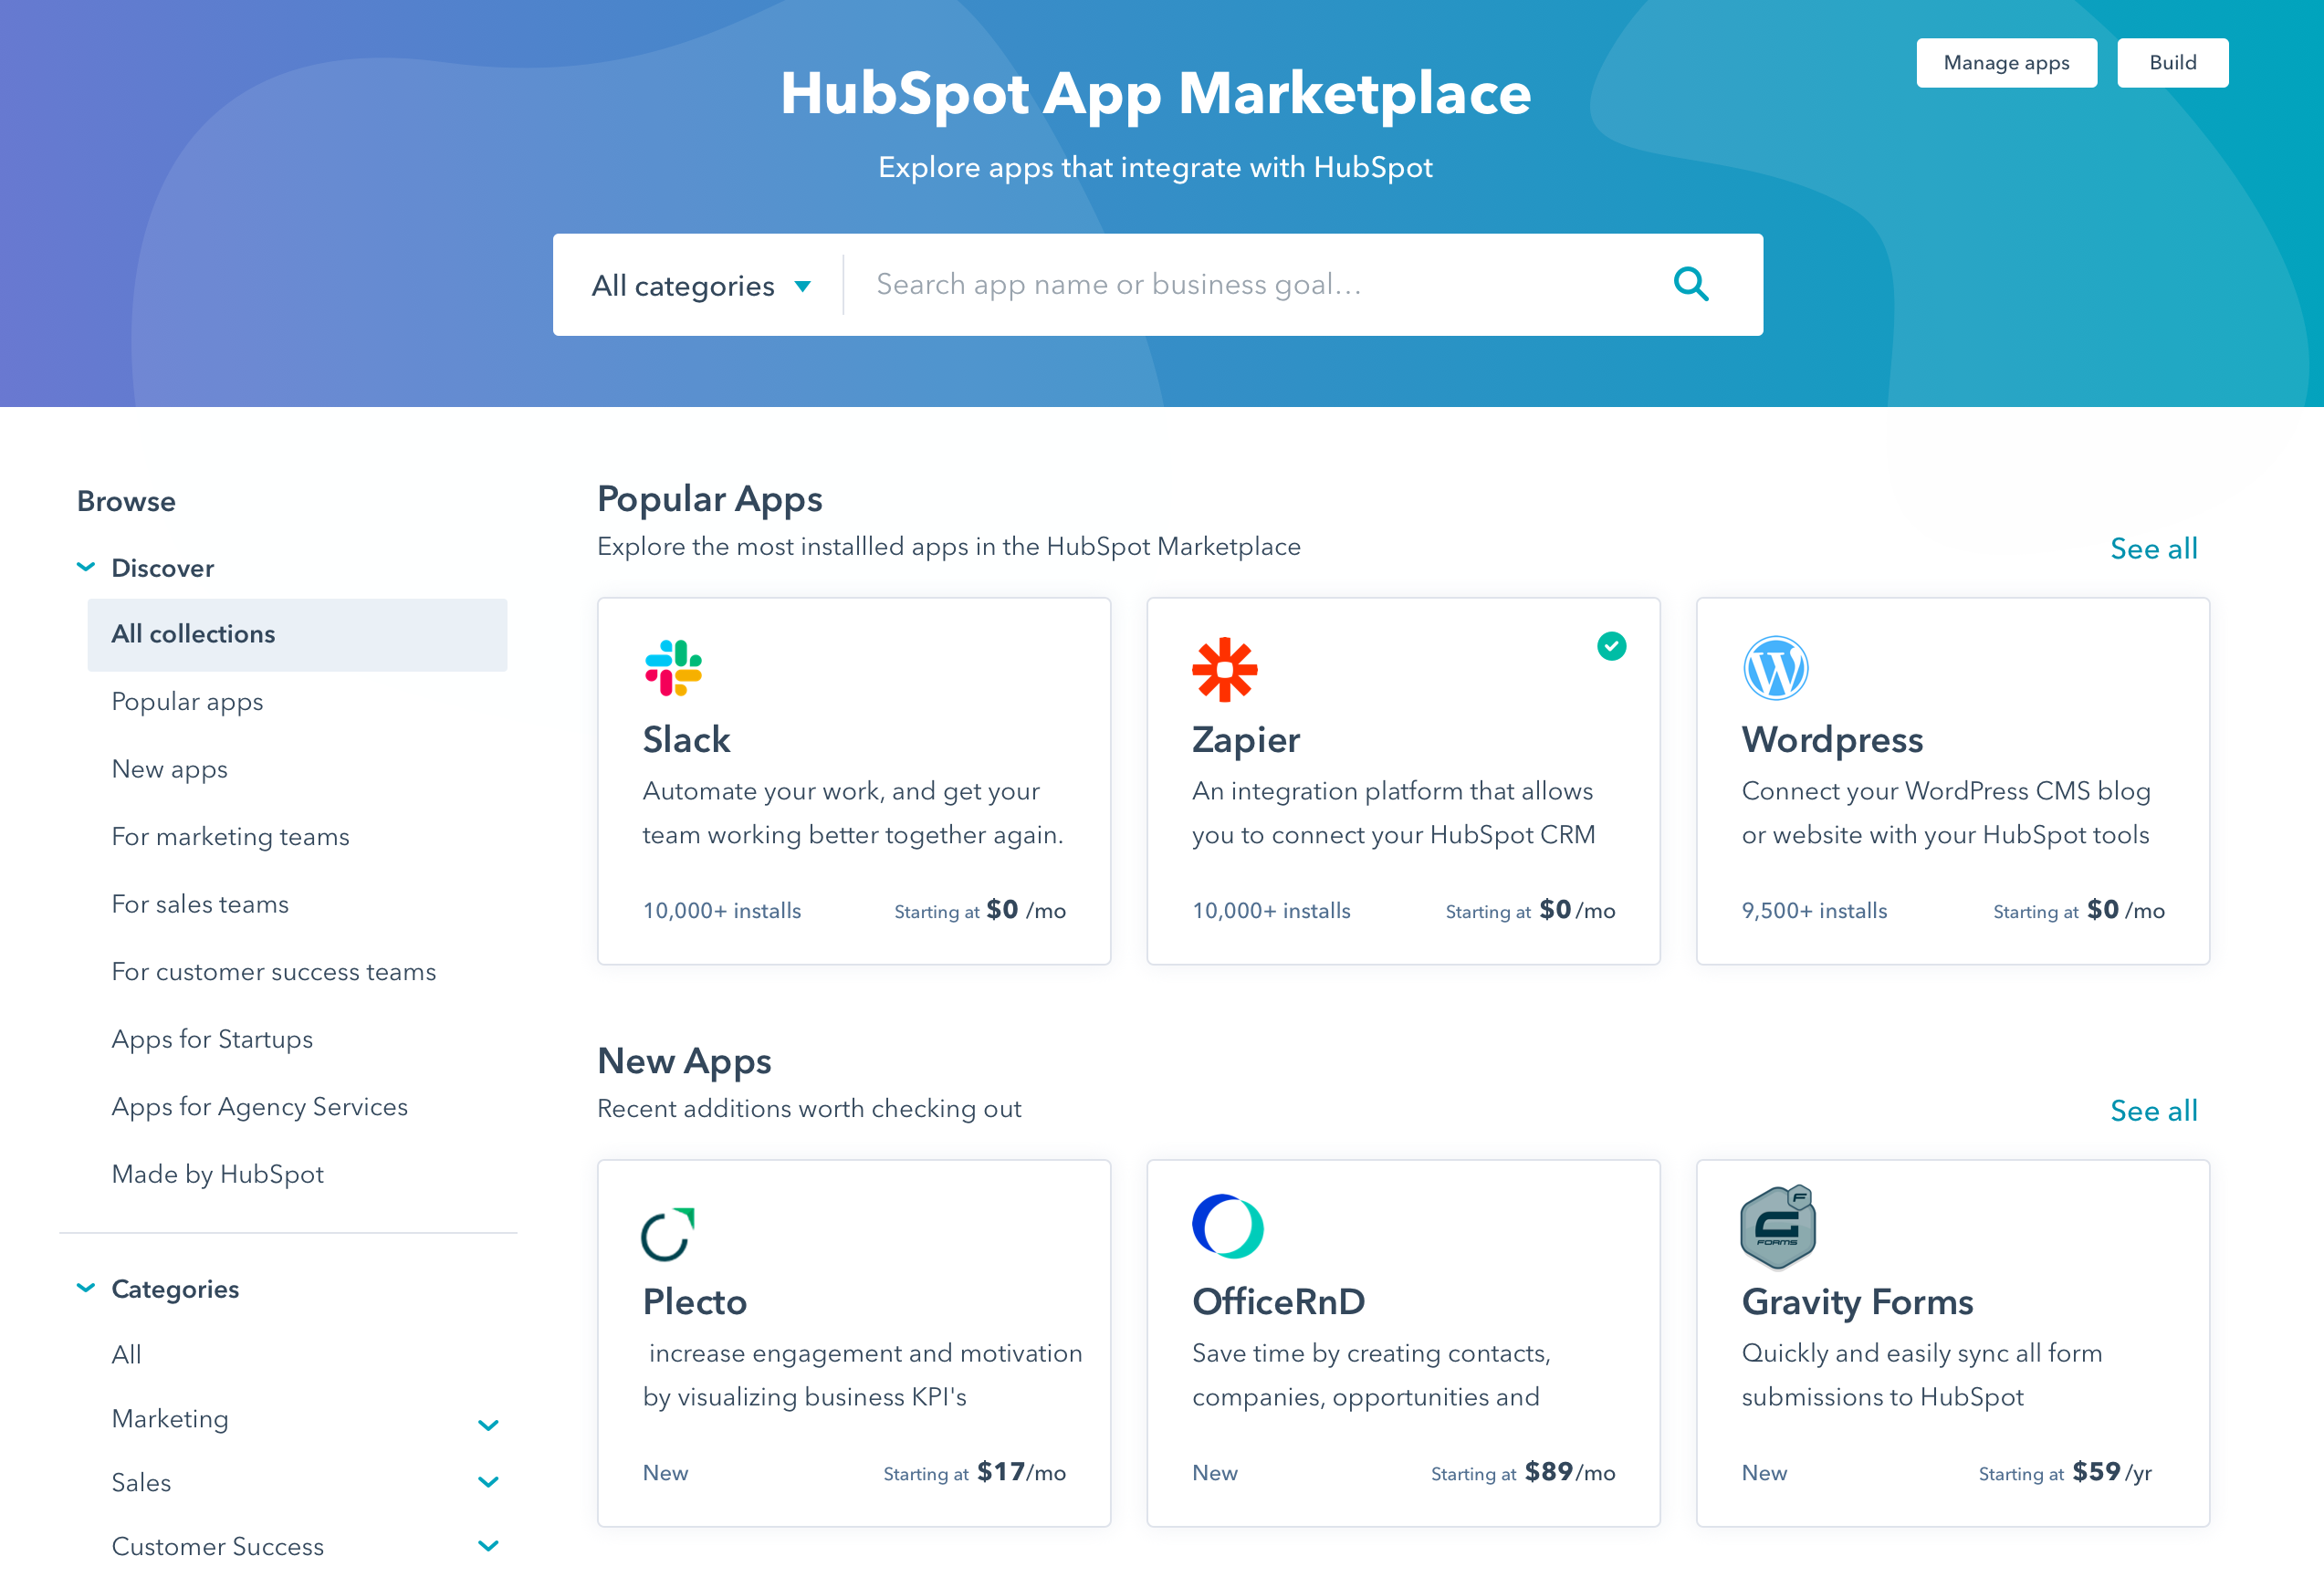 HubSpot Launches Redesigned App Marketplace to Make It Easier for